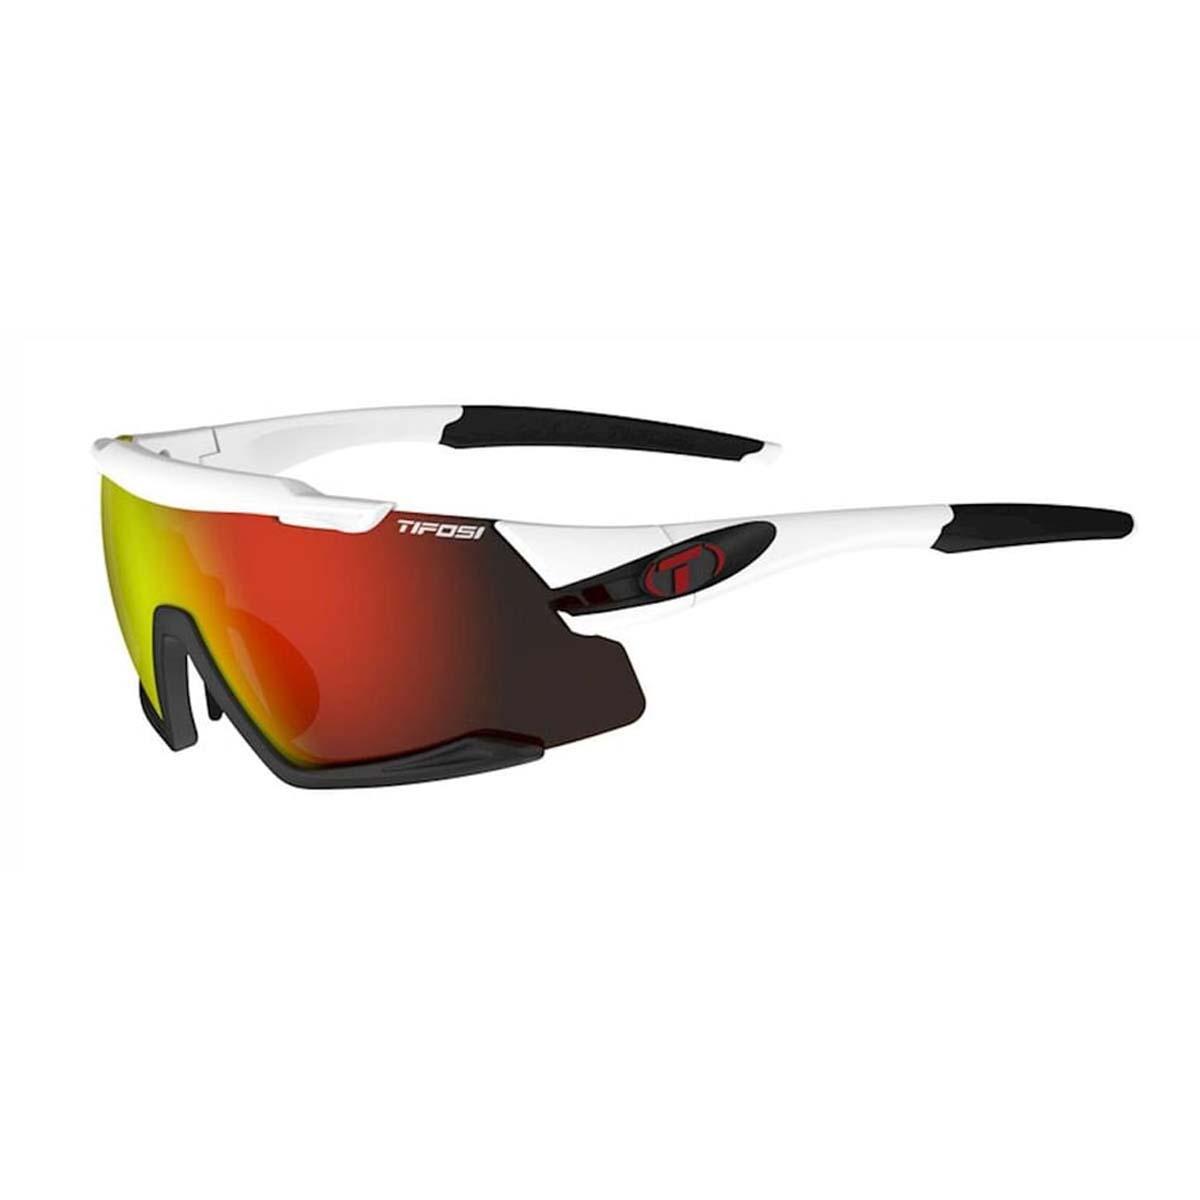 Tifosi Optics Aethon Sunglasses White/Black - Clarion Red/AC Red/Clear